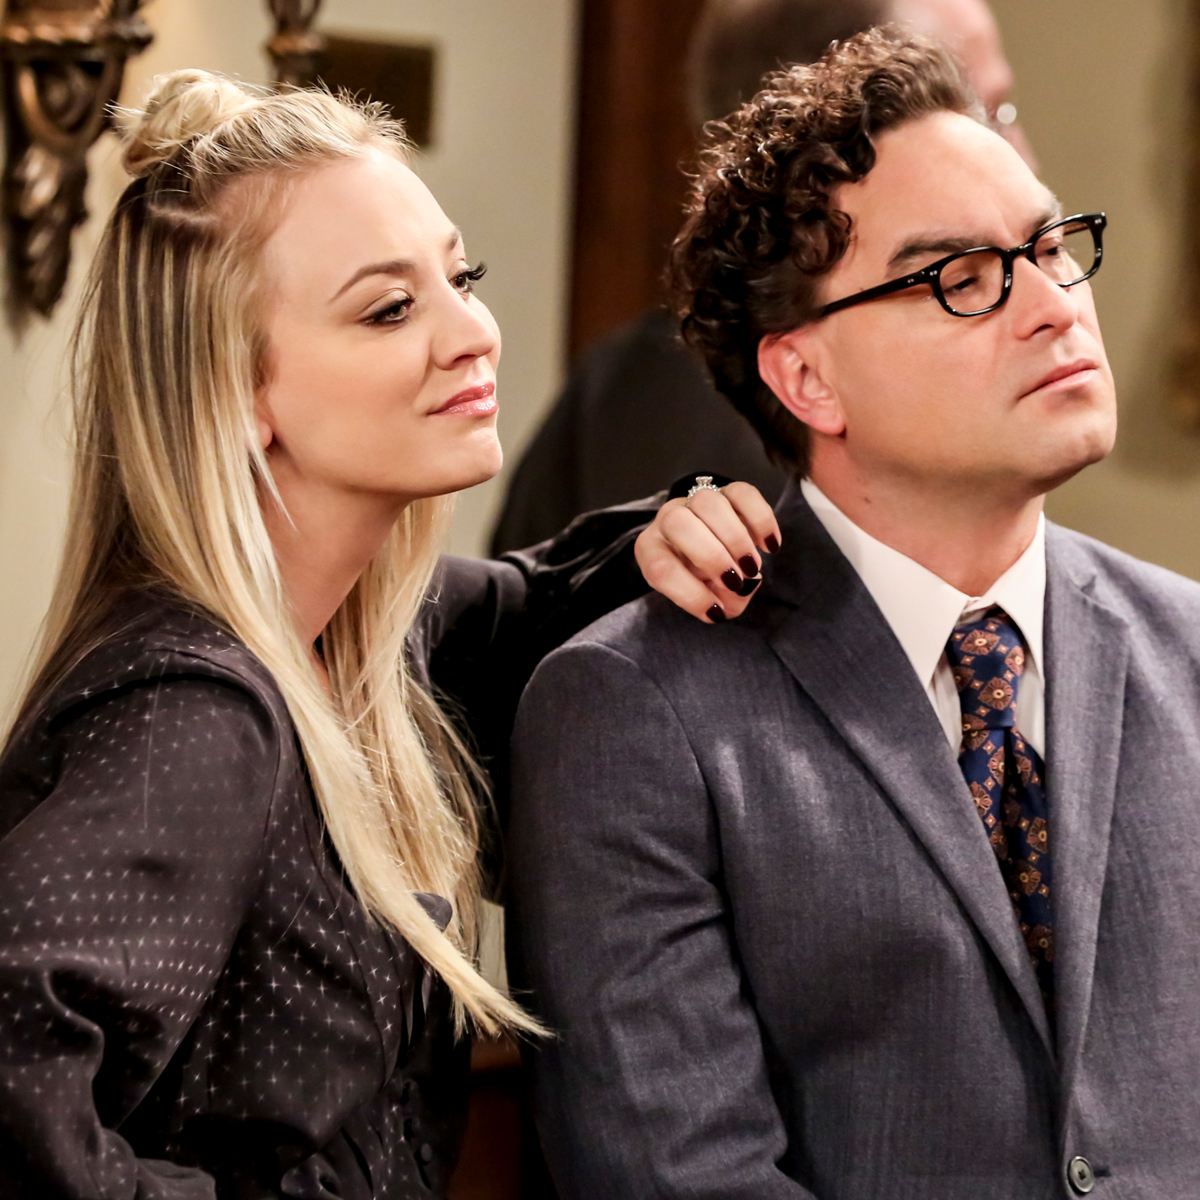 Kaley Cuoco Blowjob Sex - Johnny Galecki News, Pictures, and Videos - E! Online